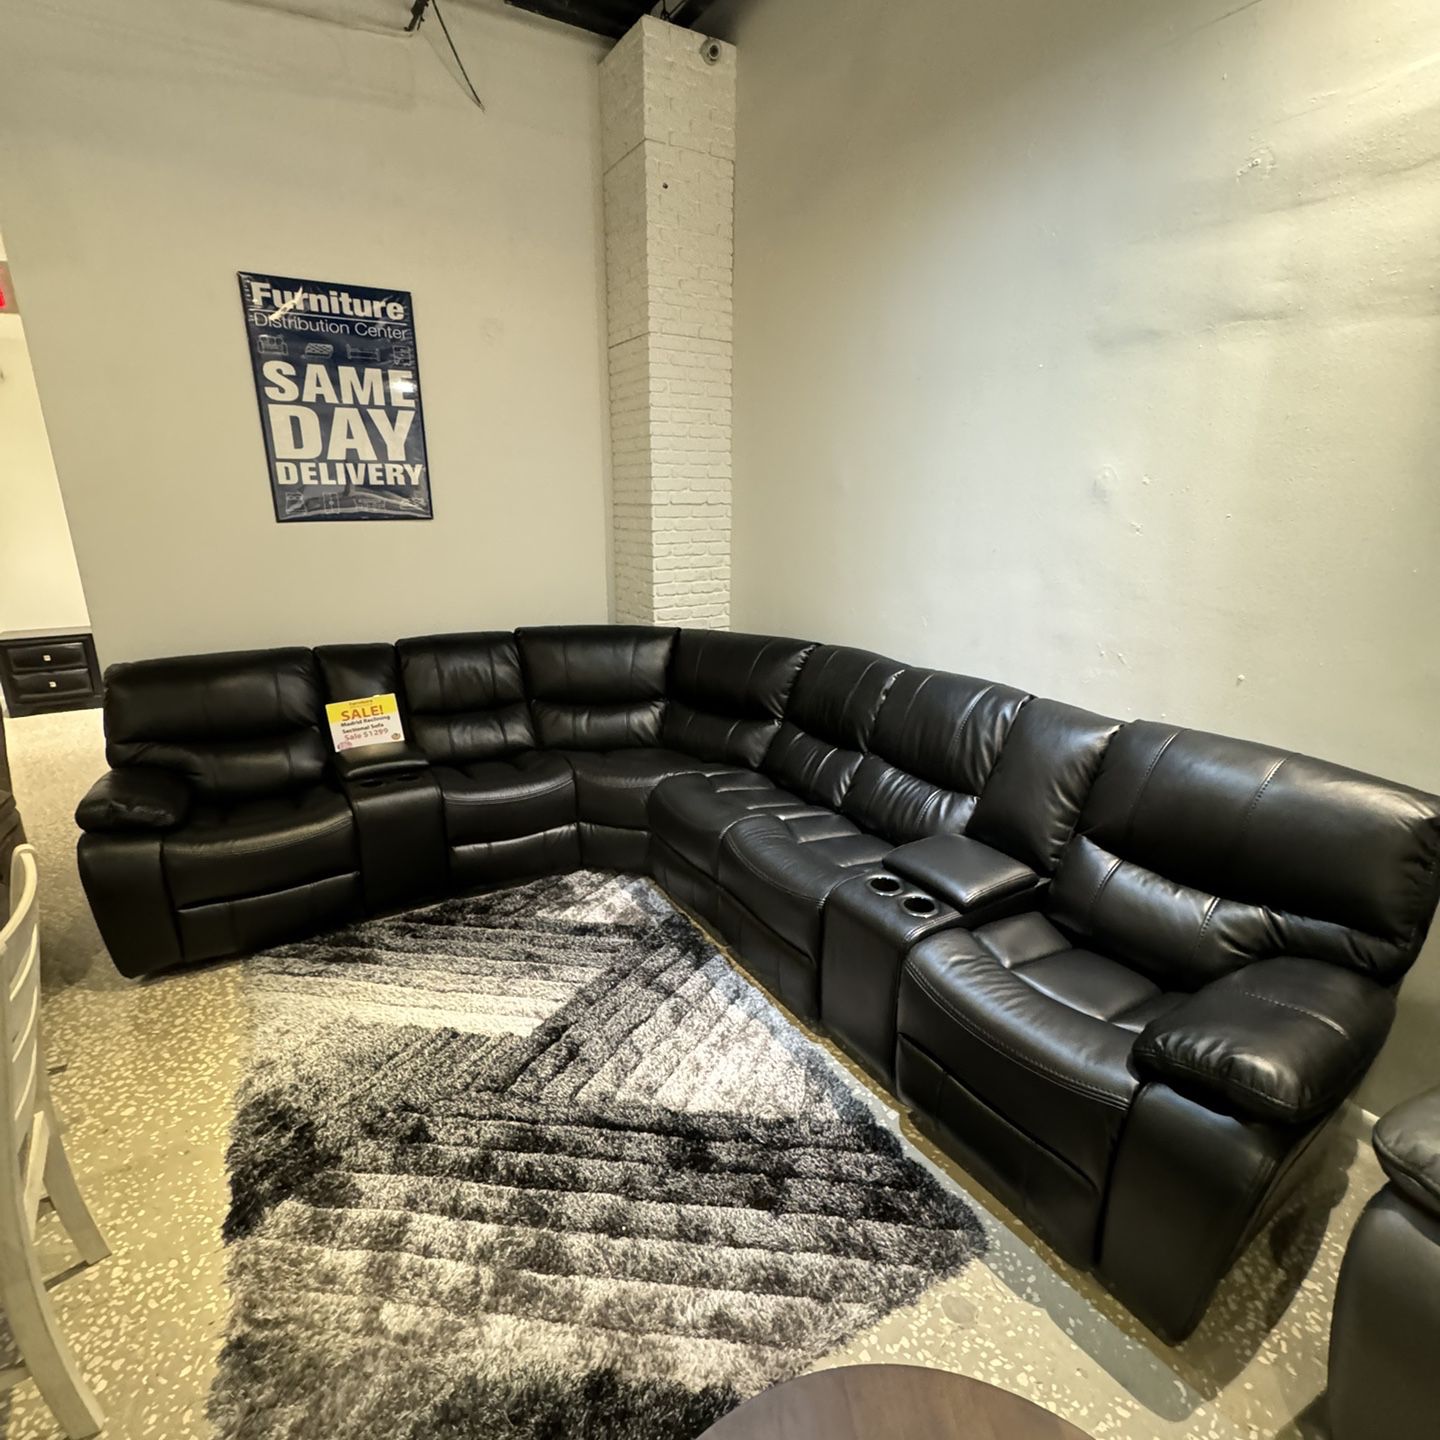 BEAUTIFUL BLACK MADRID SECTIONAL SOFA!$1099!*Same Day Delivery*No Credit Needed*Easy Financing*Huge Sale*